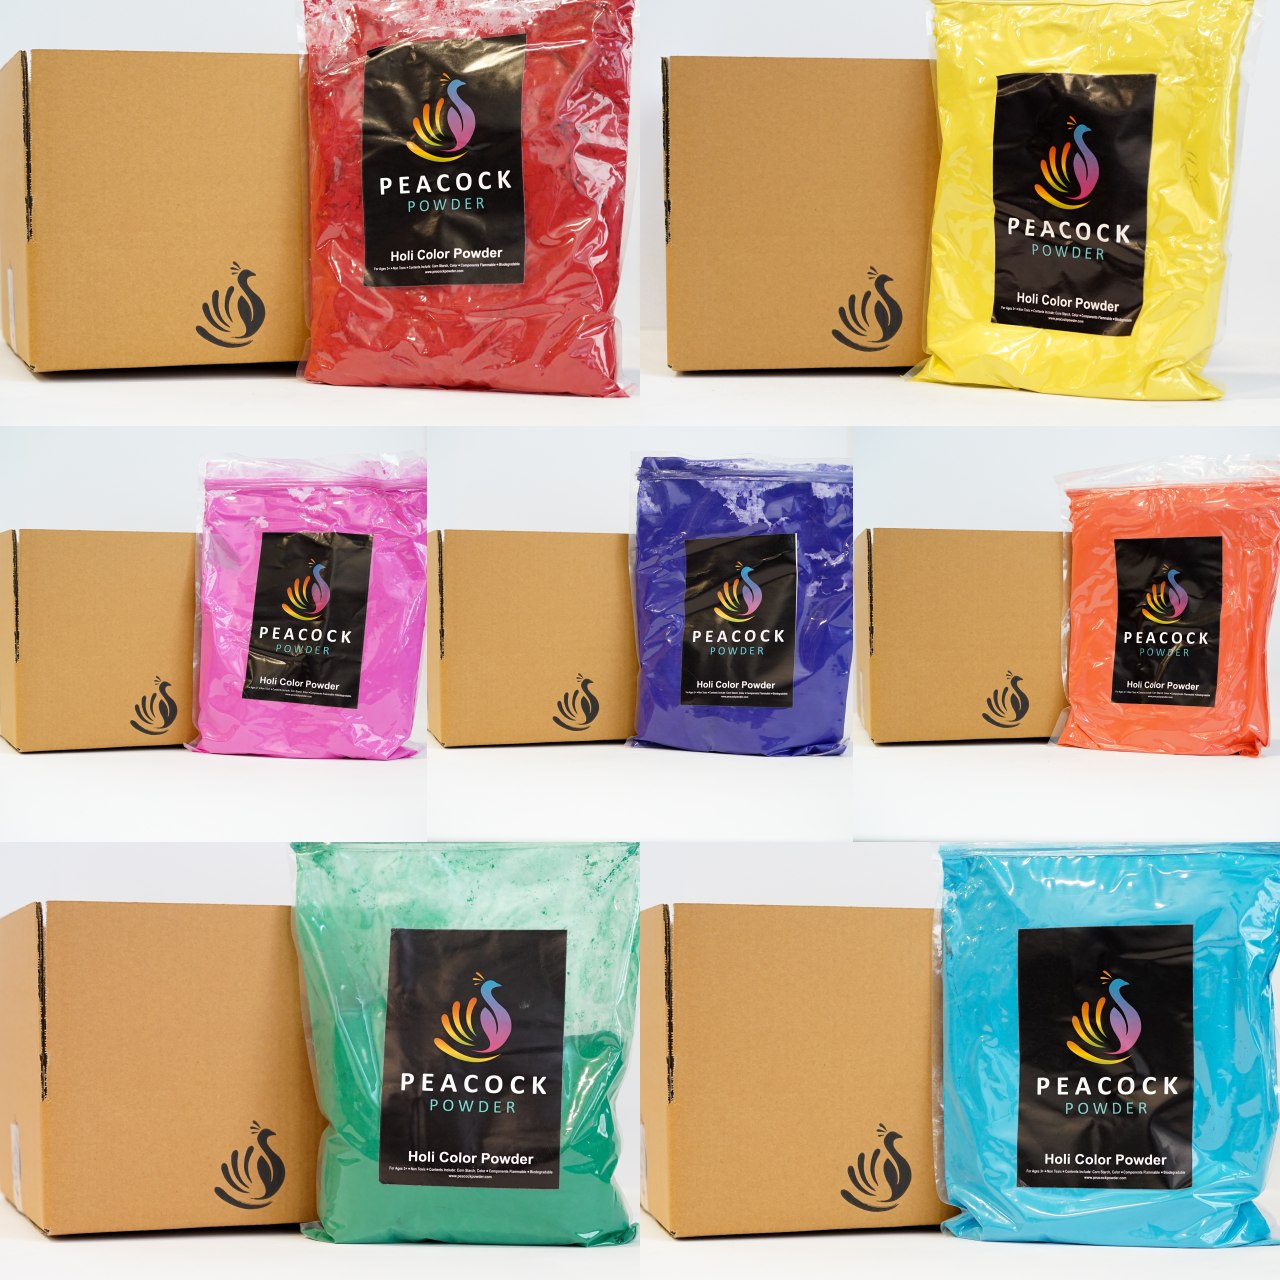 35lbs of Holi Color Powder - 7 Five Pound Bags